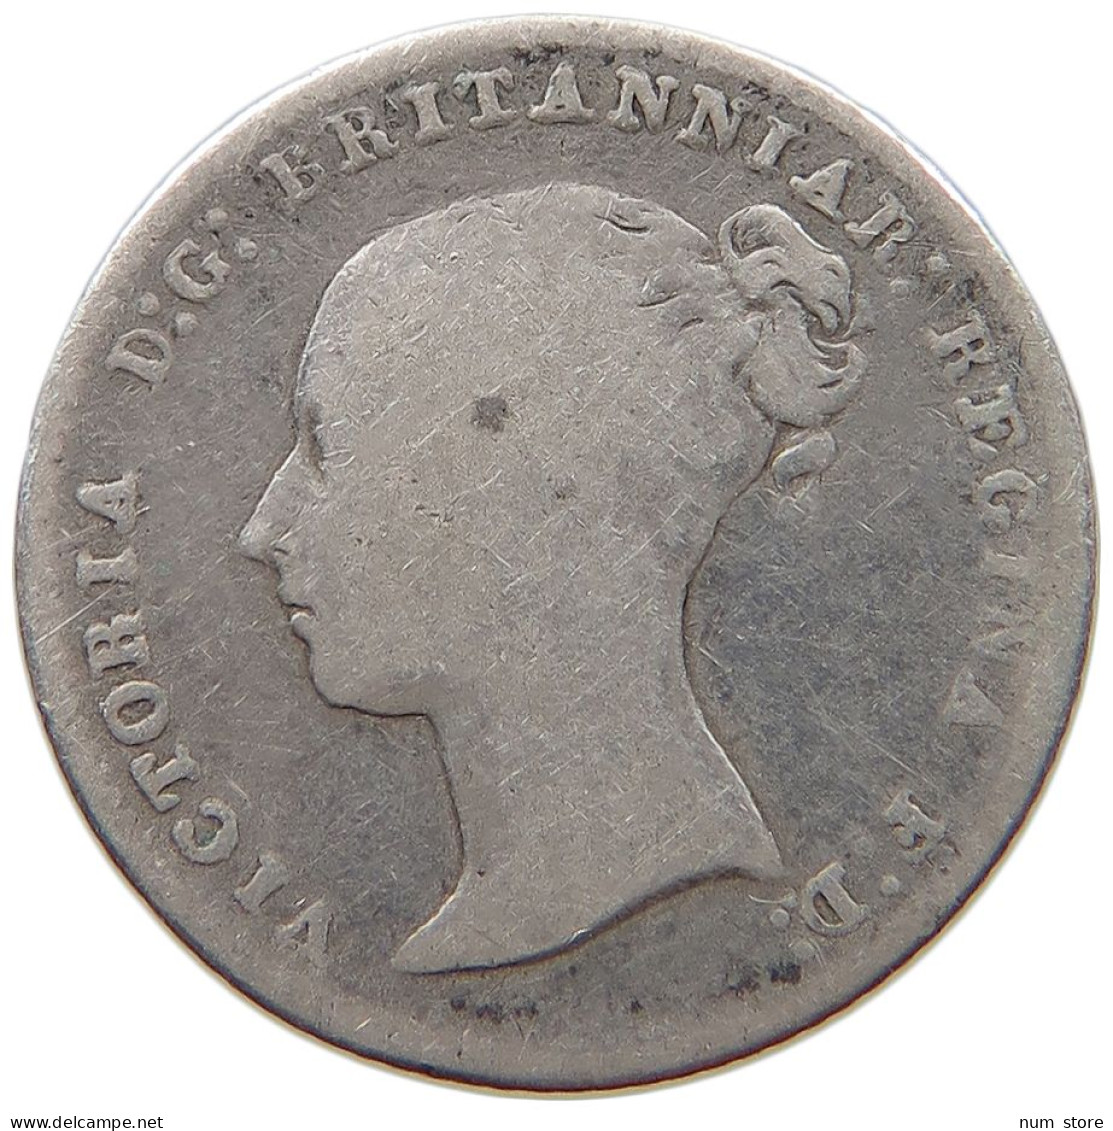 GREAT BRITAIN FOURPENCE 1845 Victoria 1837-1901 #c058 0289 - G. 4 Pence/ Groat